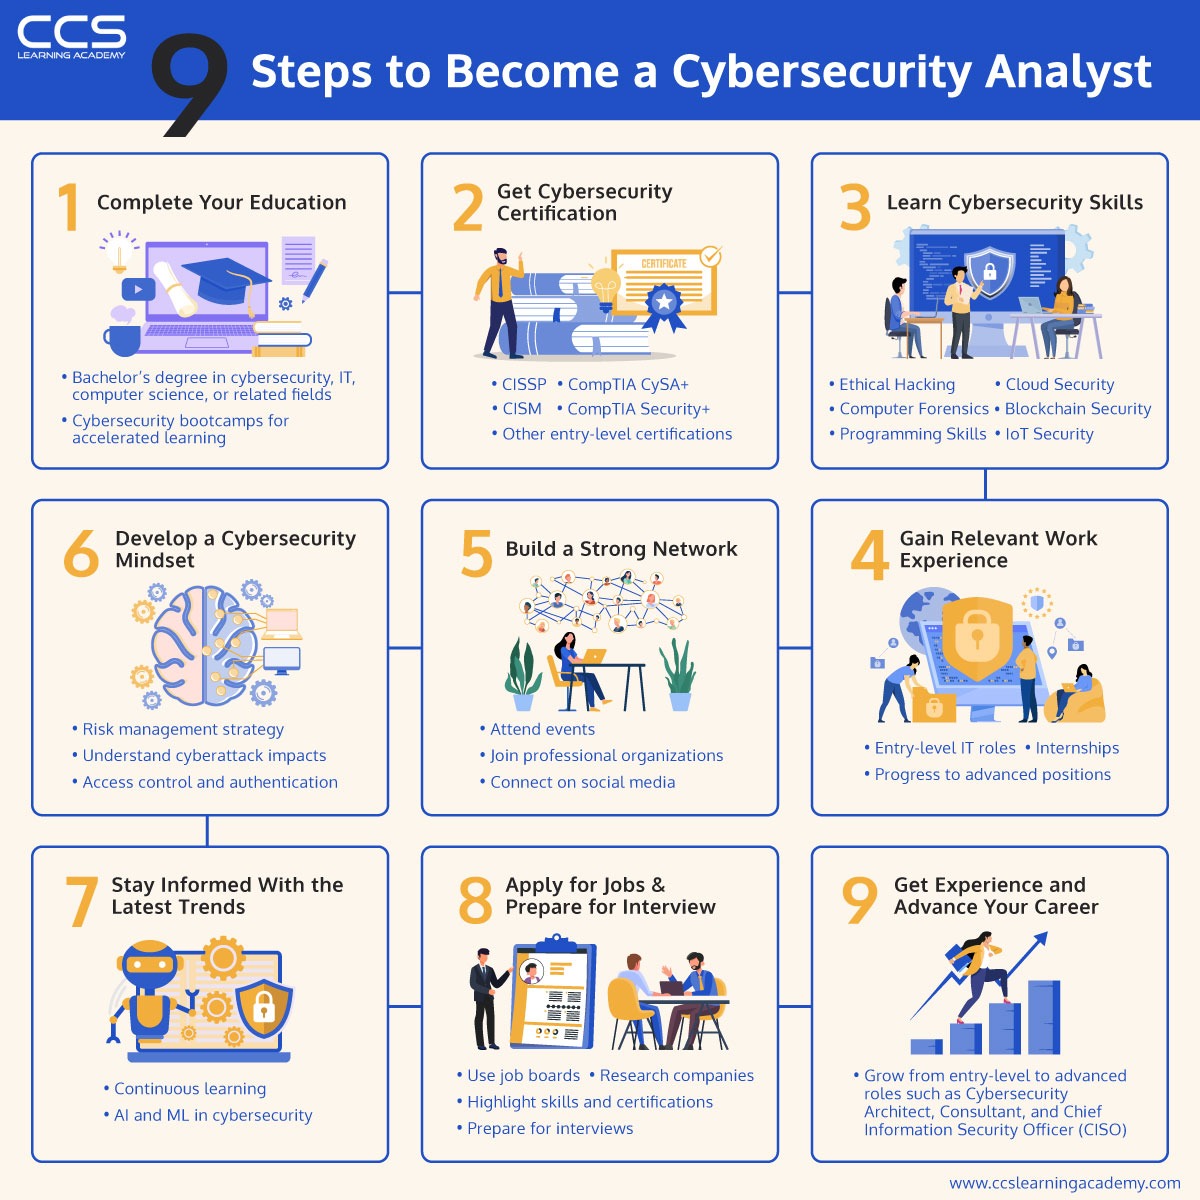 Steps to Become a Cybersecurity Analyst

Complete Your Education

* Bachelor's

Get Cybersecurity
Certification

&lt;

Learn Cybersecurity Skills

 

   
   
  
 

Develop a Cybersecurity
Mindset

 

 

Manageme

tand cybe:

  

Stay Informed With the
Latest Trends

 

 

 

afi 2

 

nal organizations

social media

Apply for Jobs &amp;
Prepare for Interview

Gain Relevant Work
Experience

any’

LJ eh

y-level IT

 

A EE var

 

Get Experience and
Advance Your Career

ion Security Officer (CISO)

 

 

gas